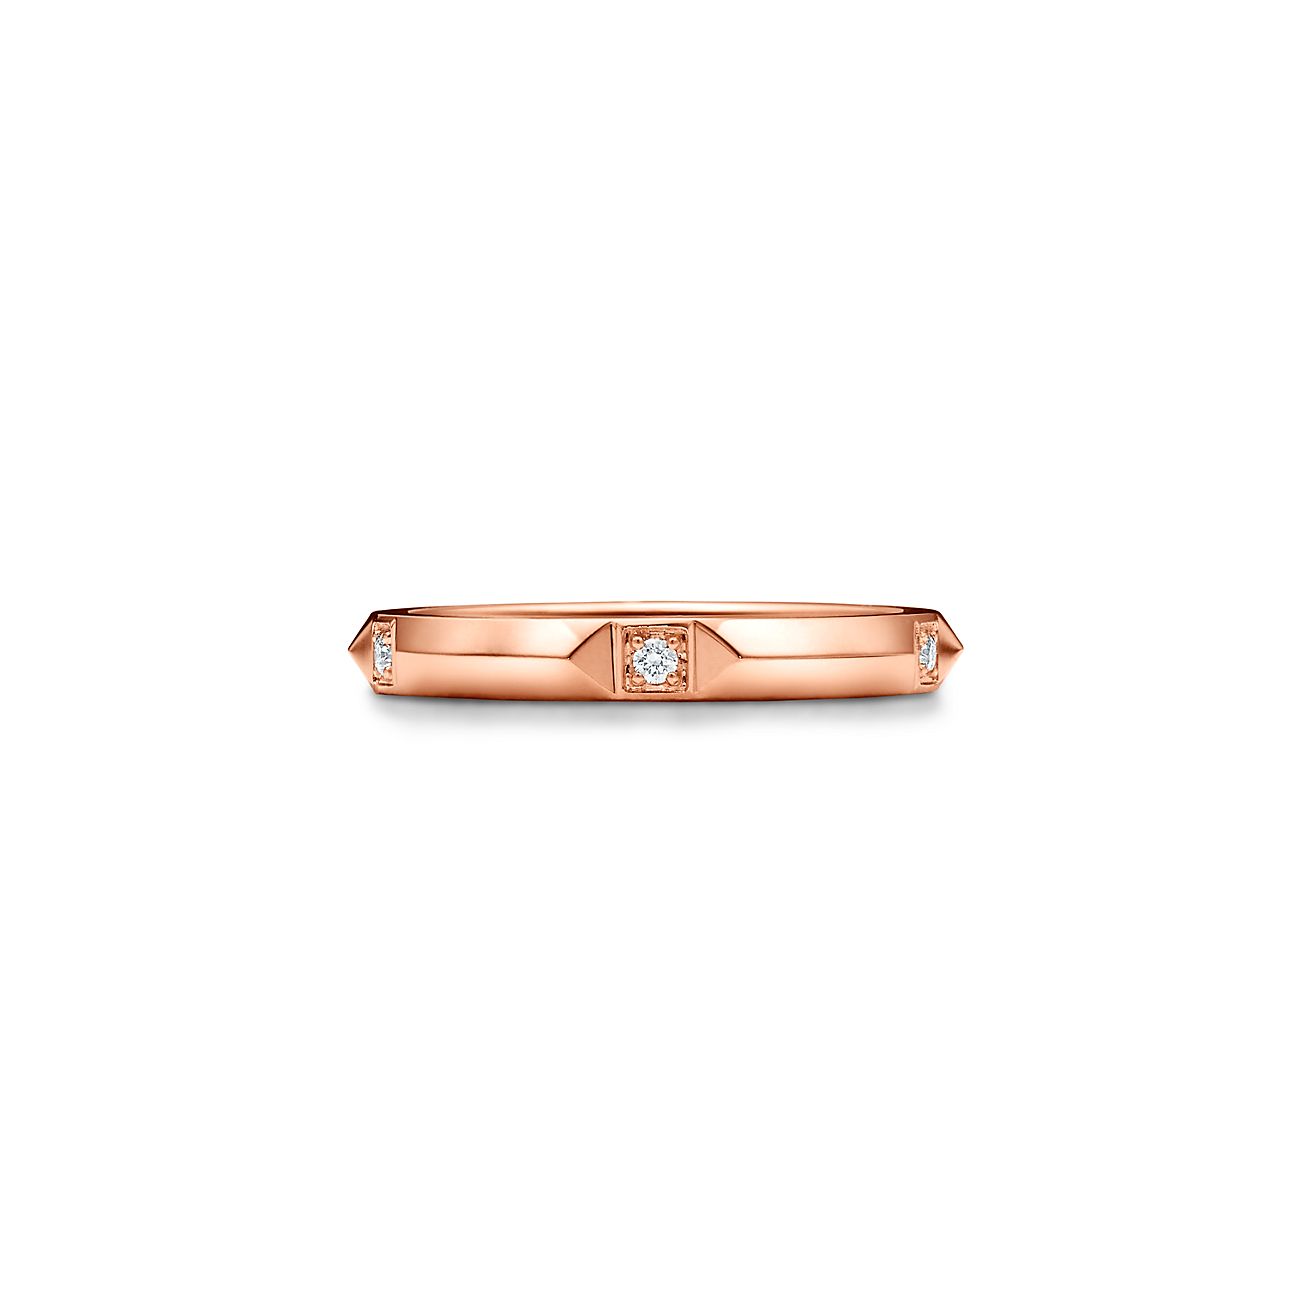 Tiffany True band ring in 18k rose gold with diamonds, 2.5 mm wide